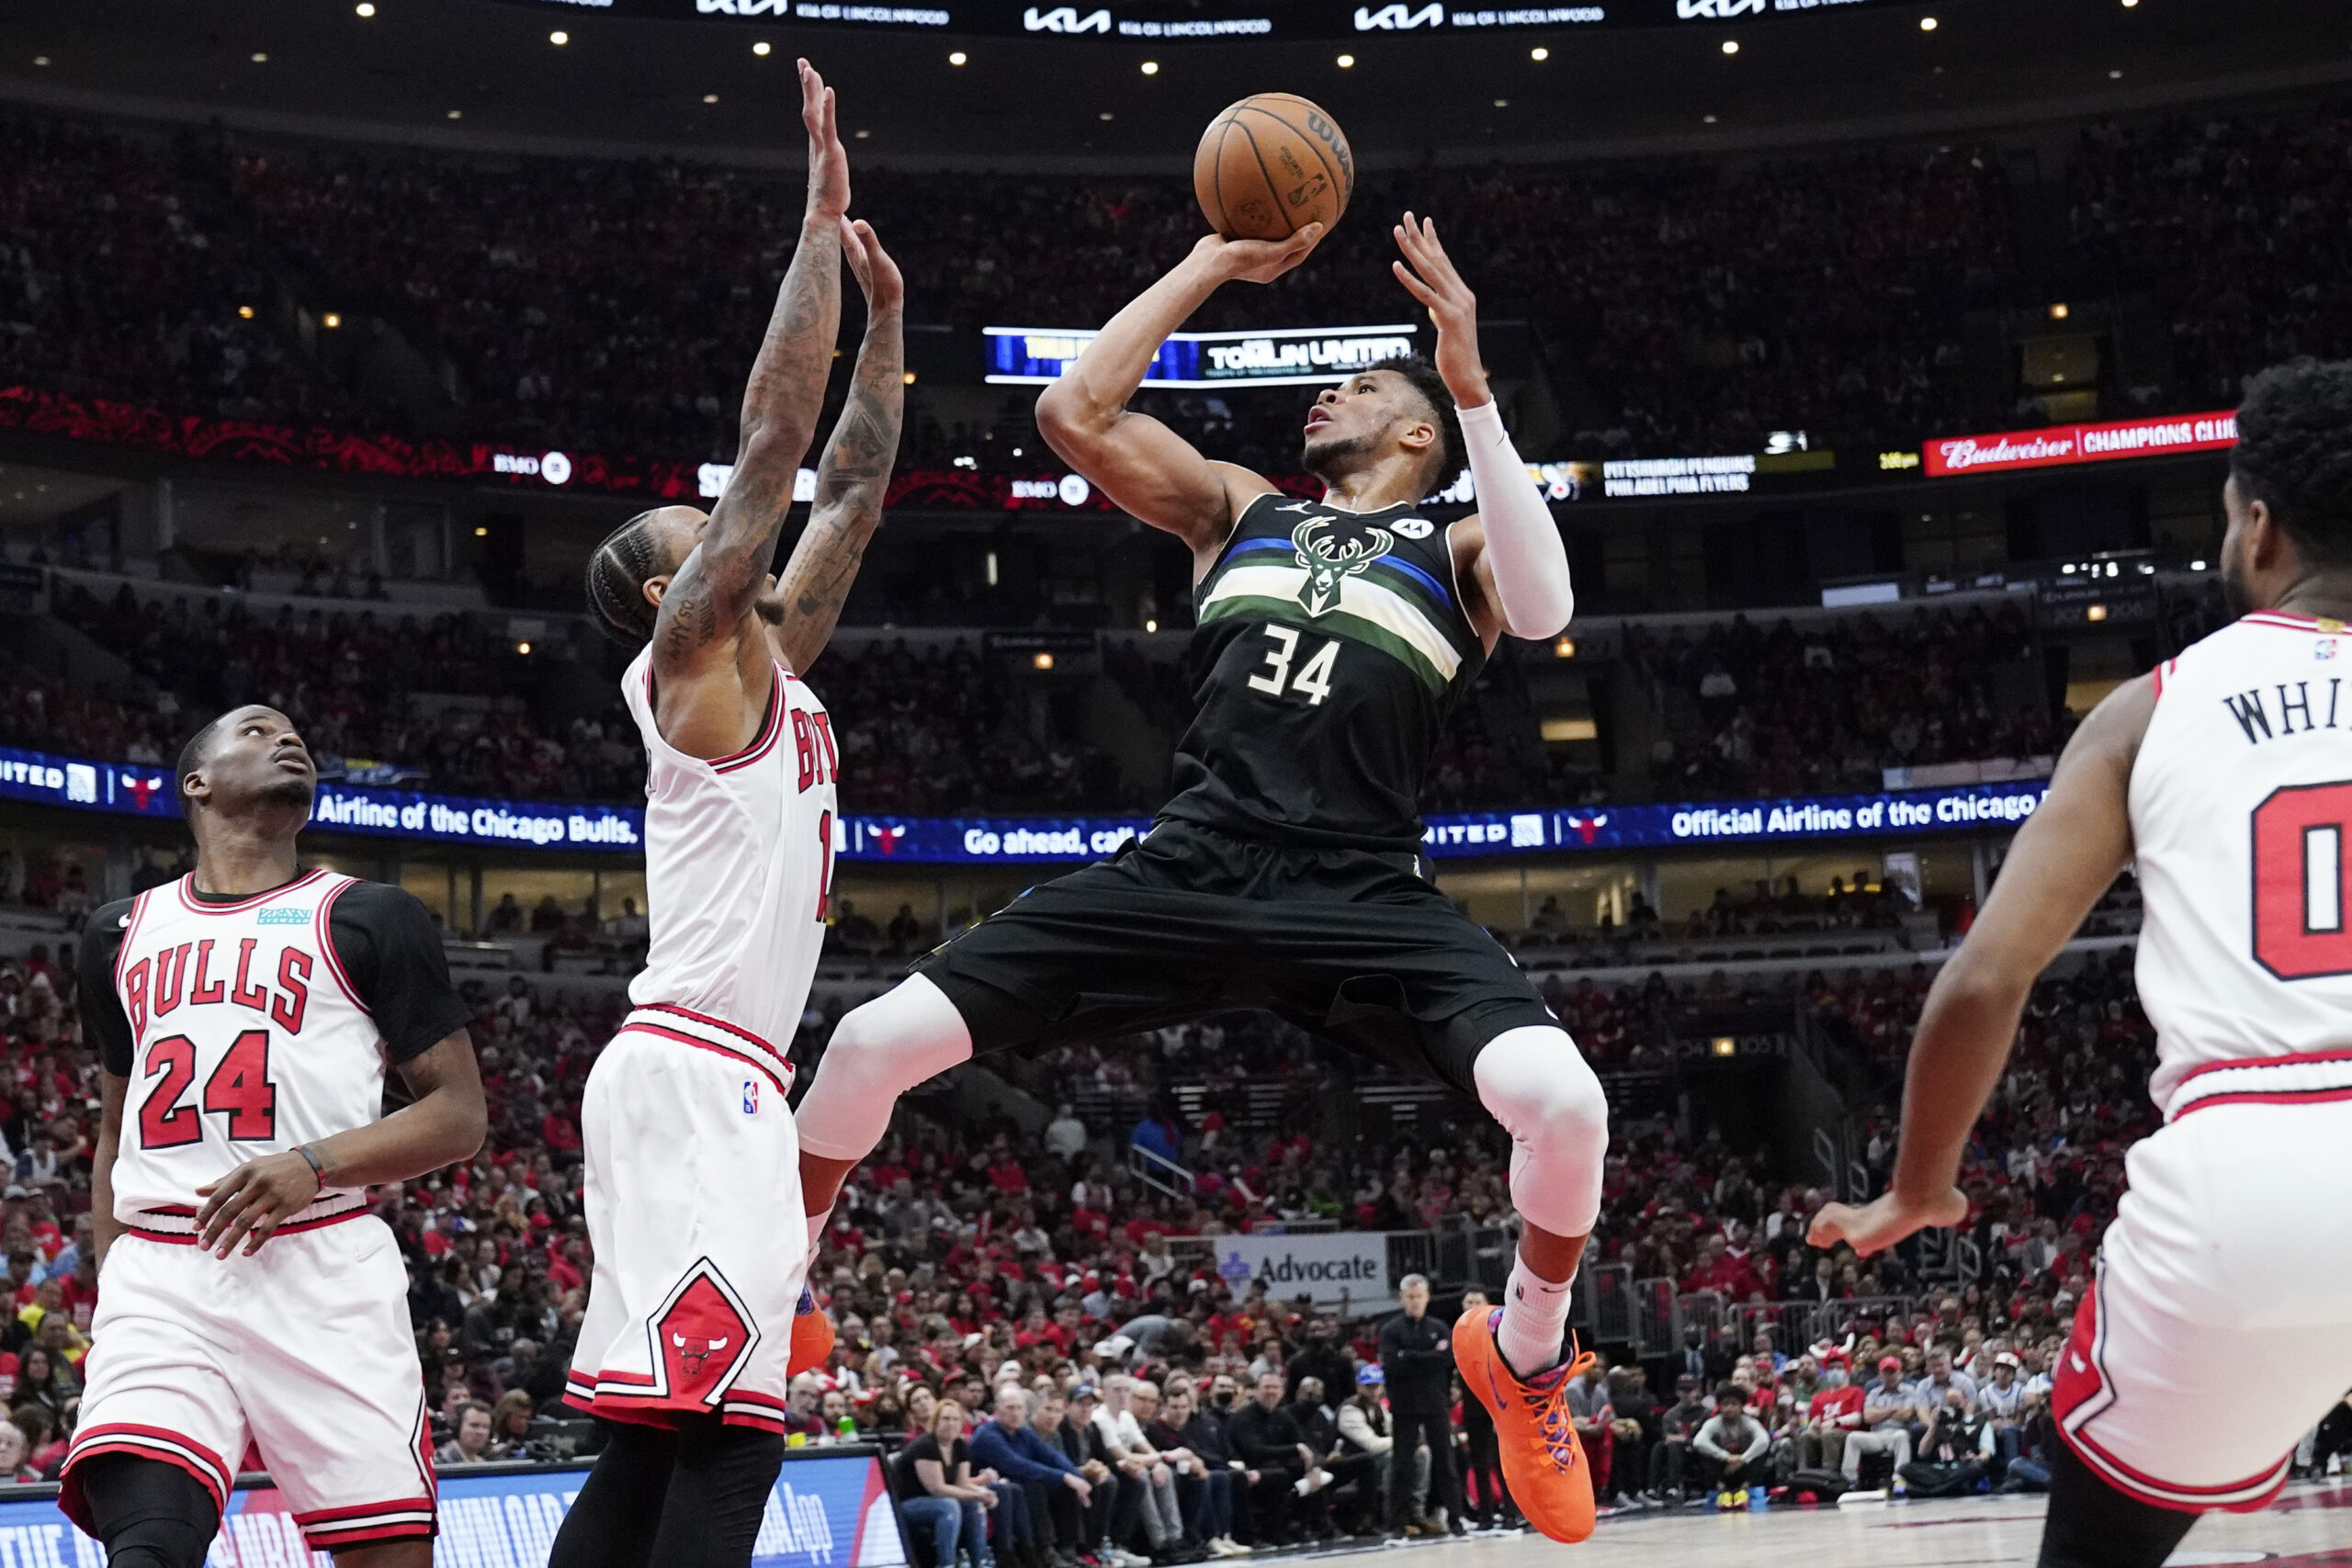 Bucks lead series against Bulls and are one step closer to Eastern Conference semifinals